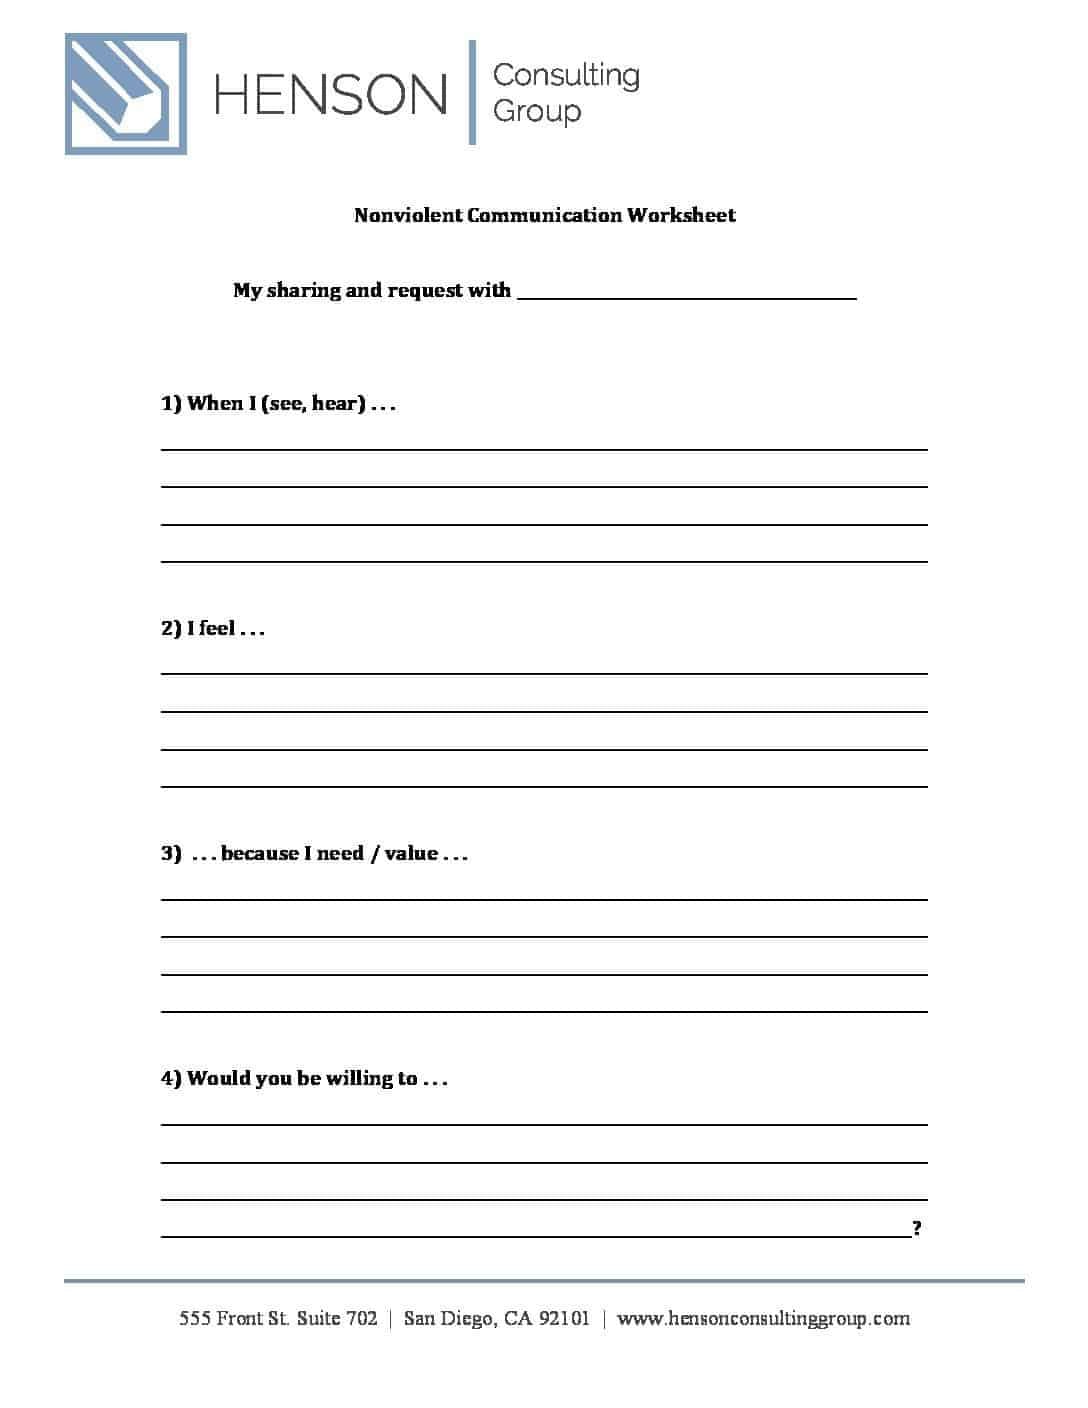 communication-worksheets-for-adults-pdf-db-excel